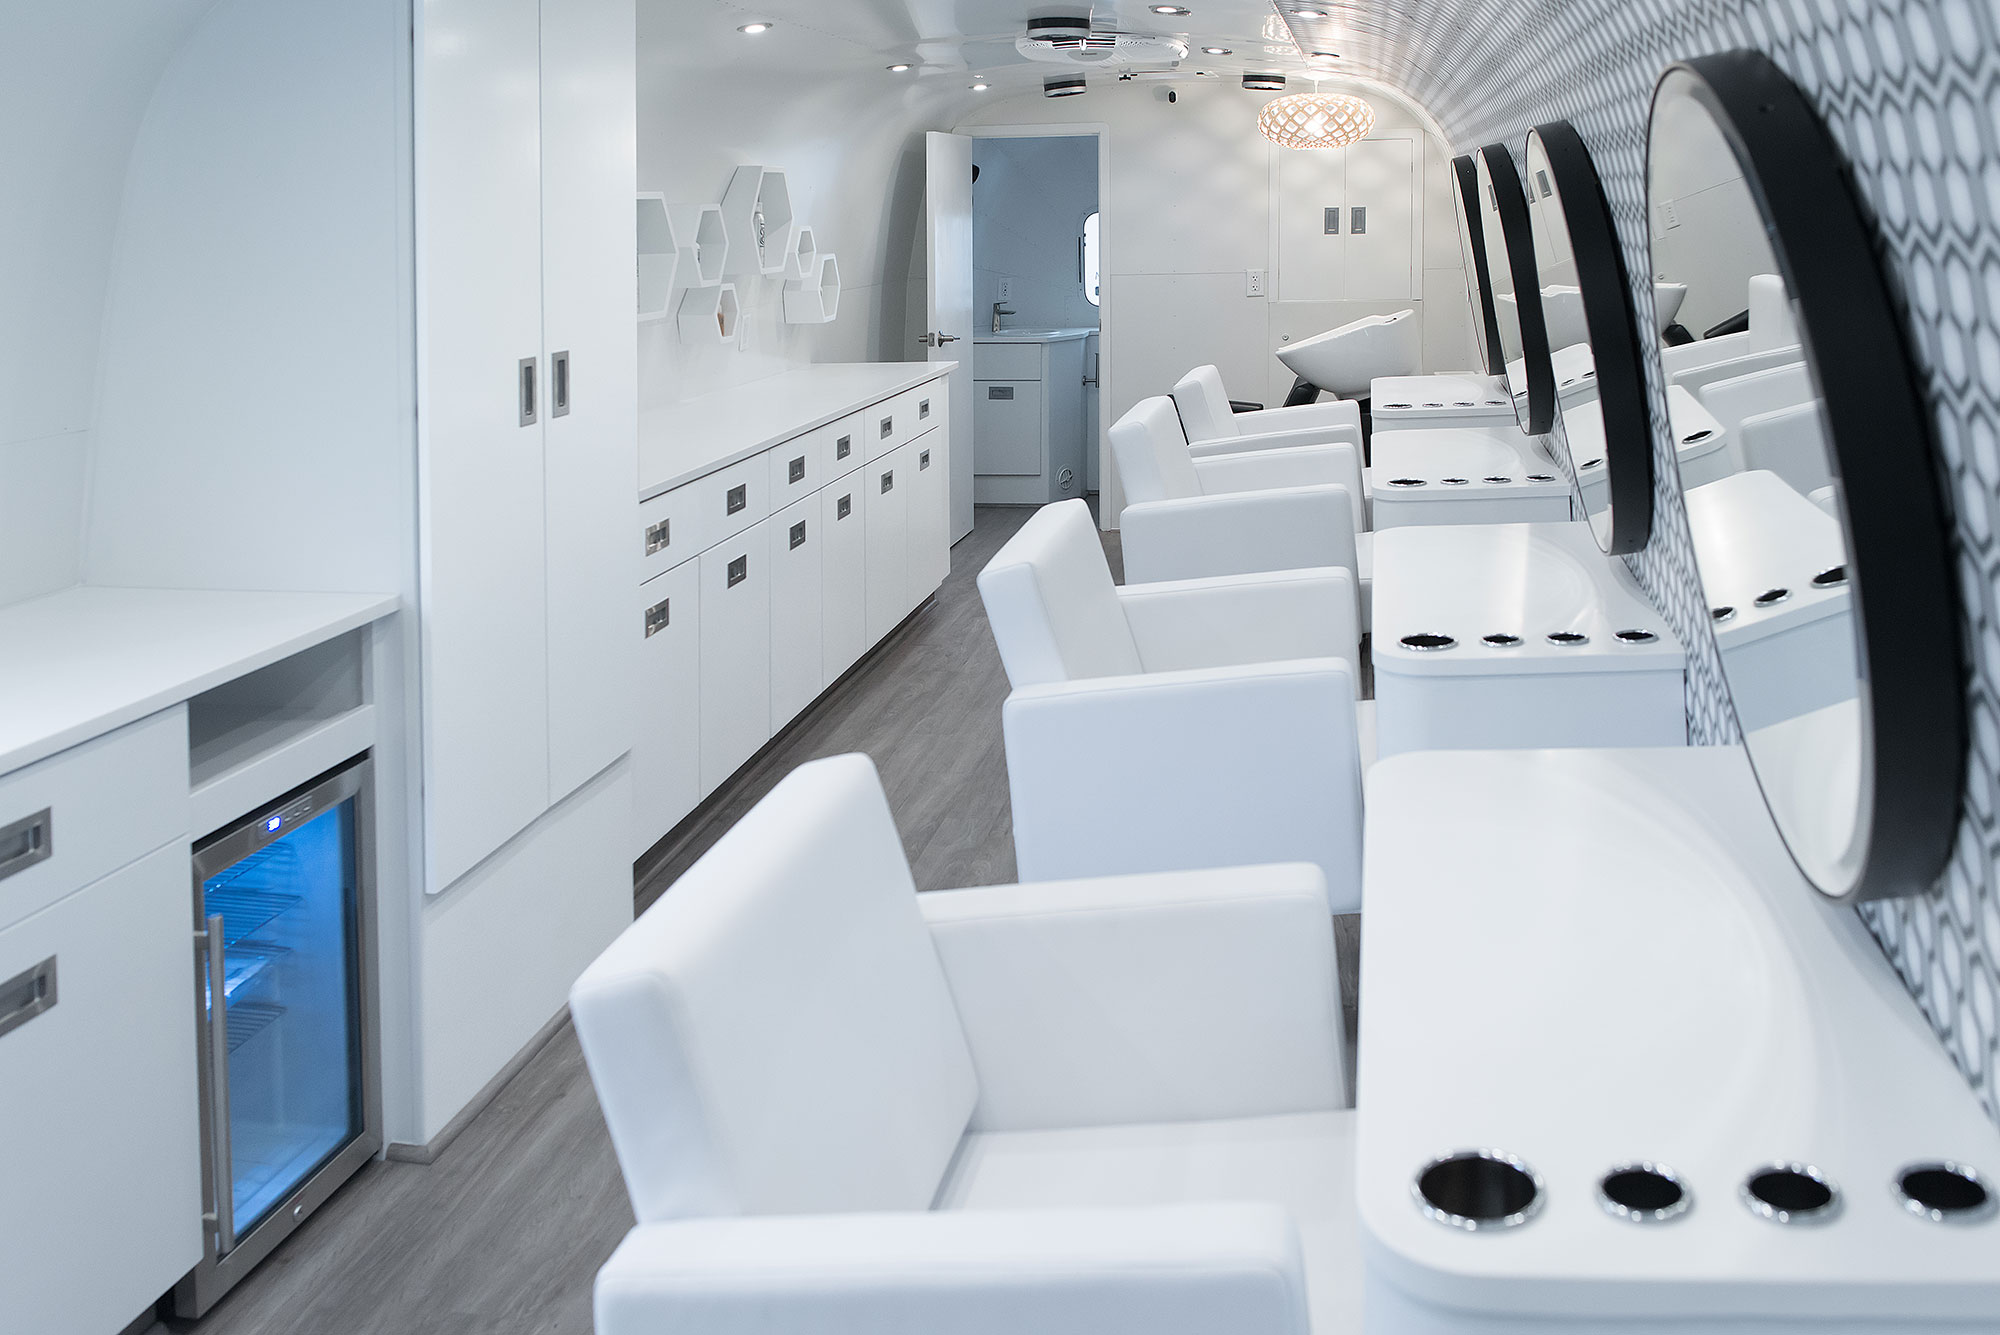 Are Airstreams a Great Option for Salon Businesses?